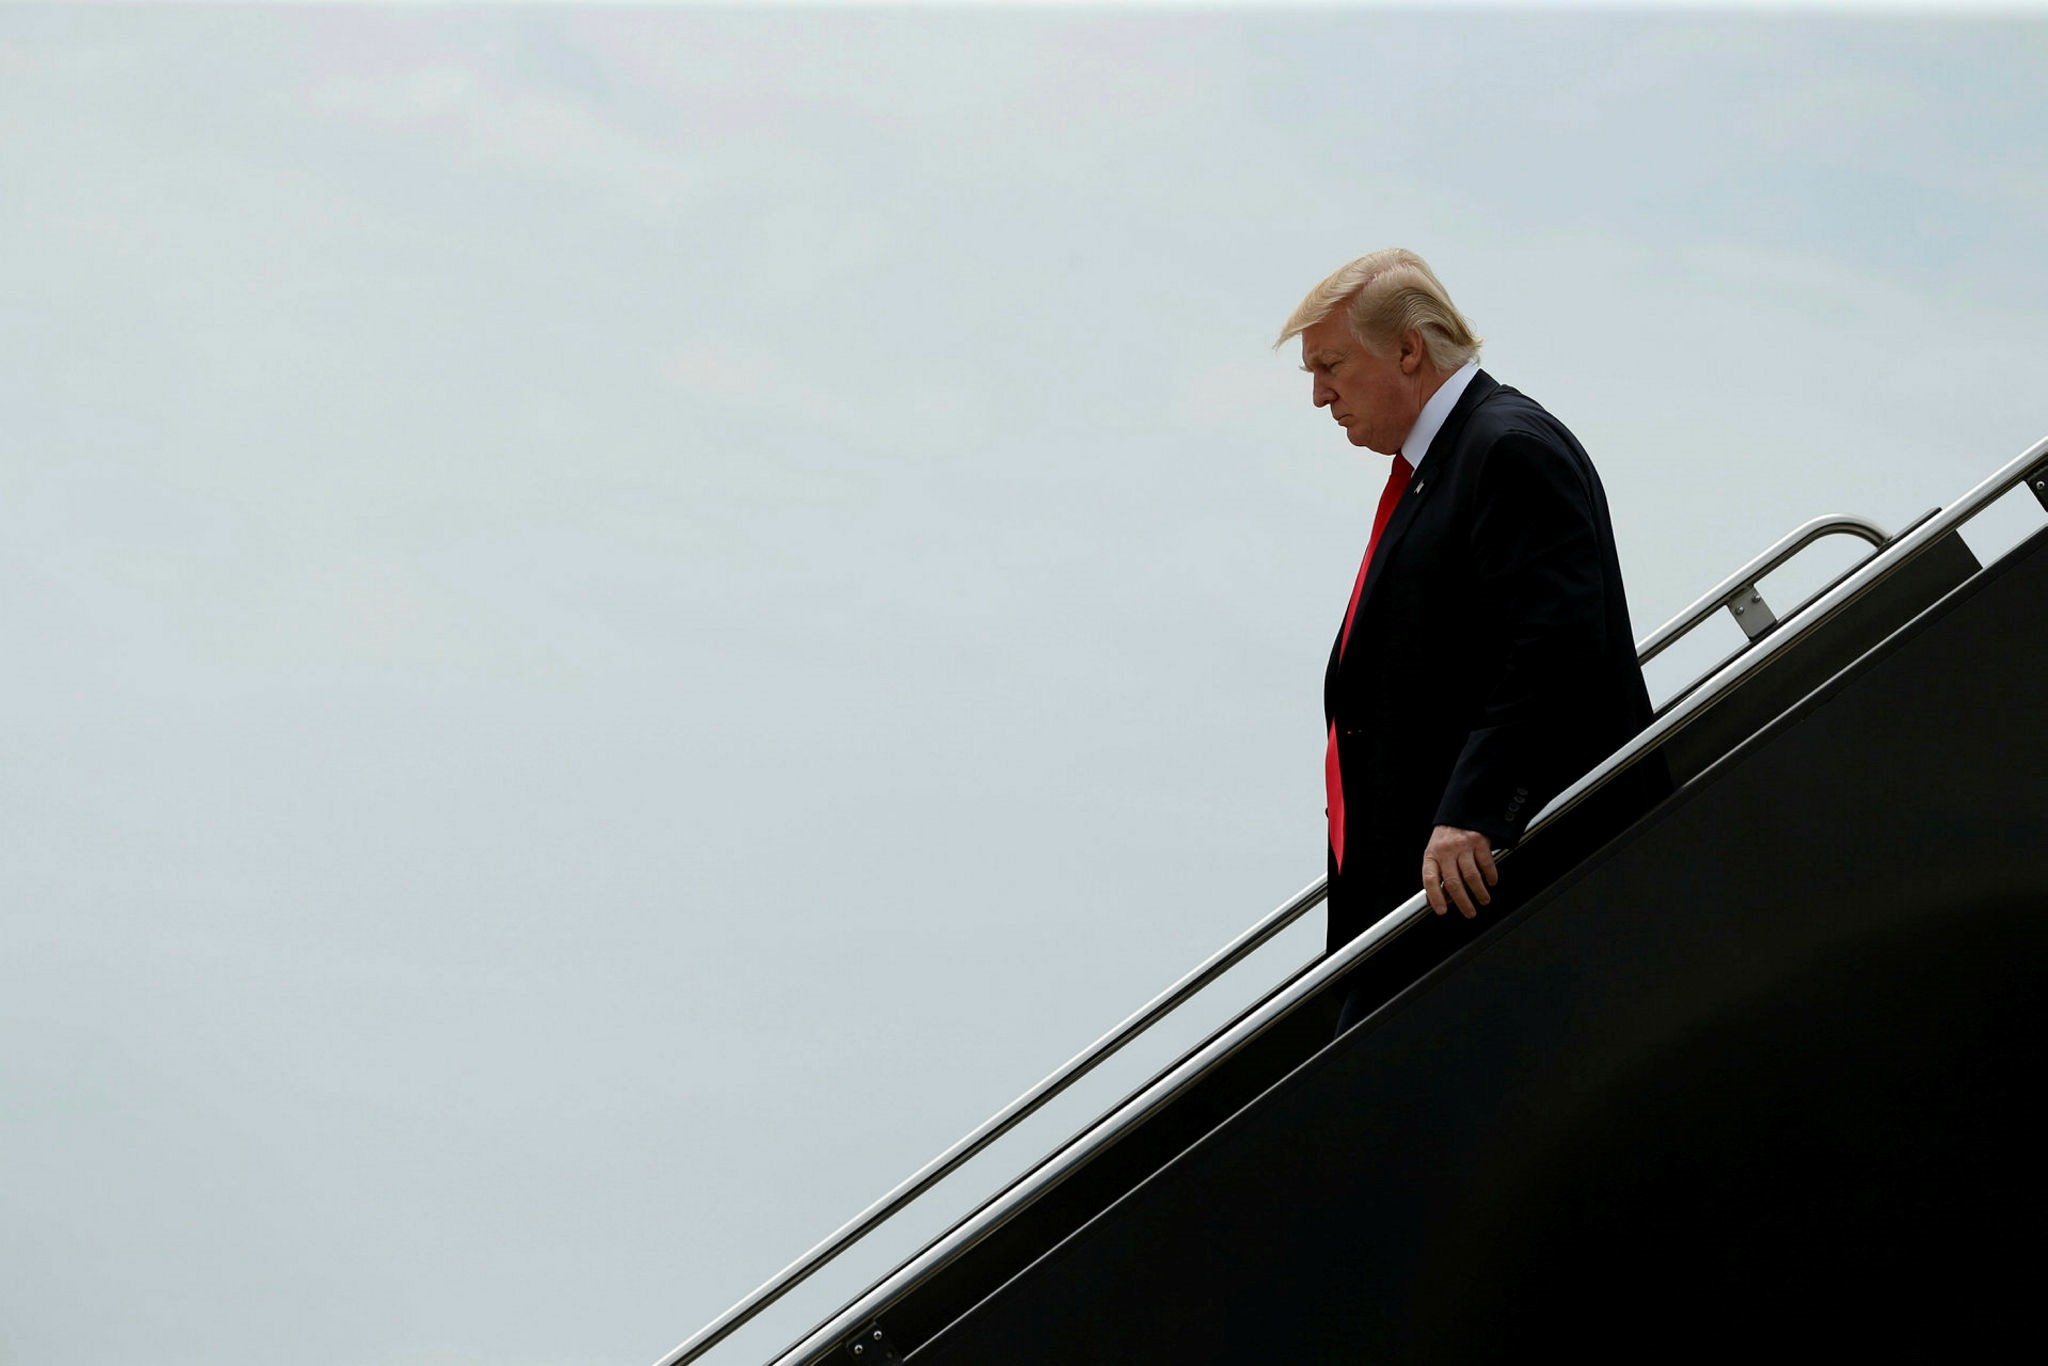 President Donald Trump arrives aboard Air Force One at Washingtonu2019s Dulles International Airport in Chantilly, Virginia, July 22